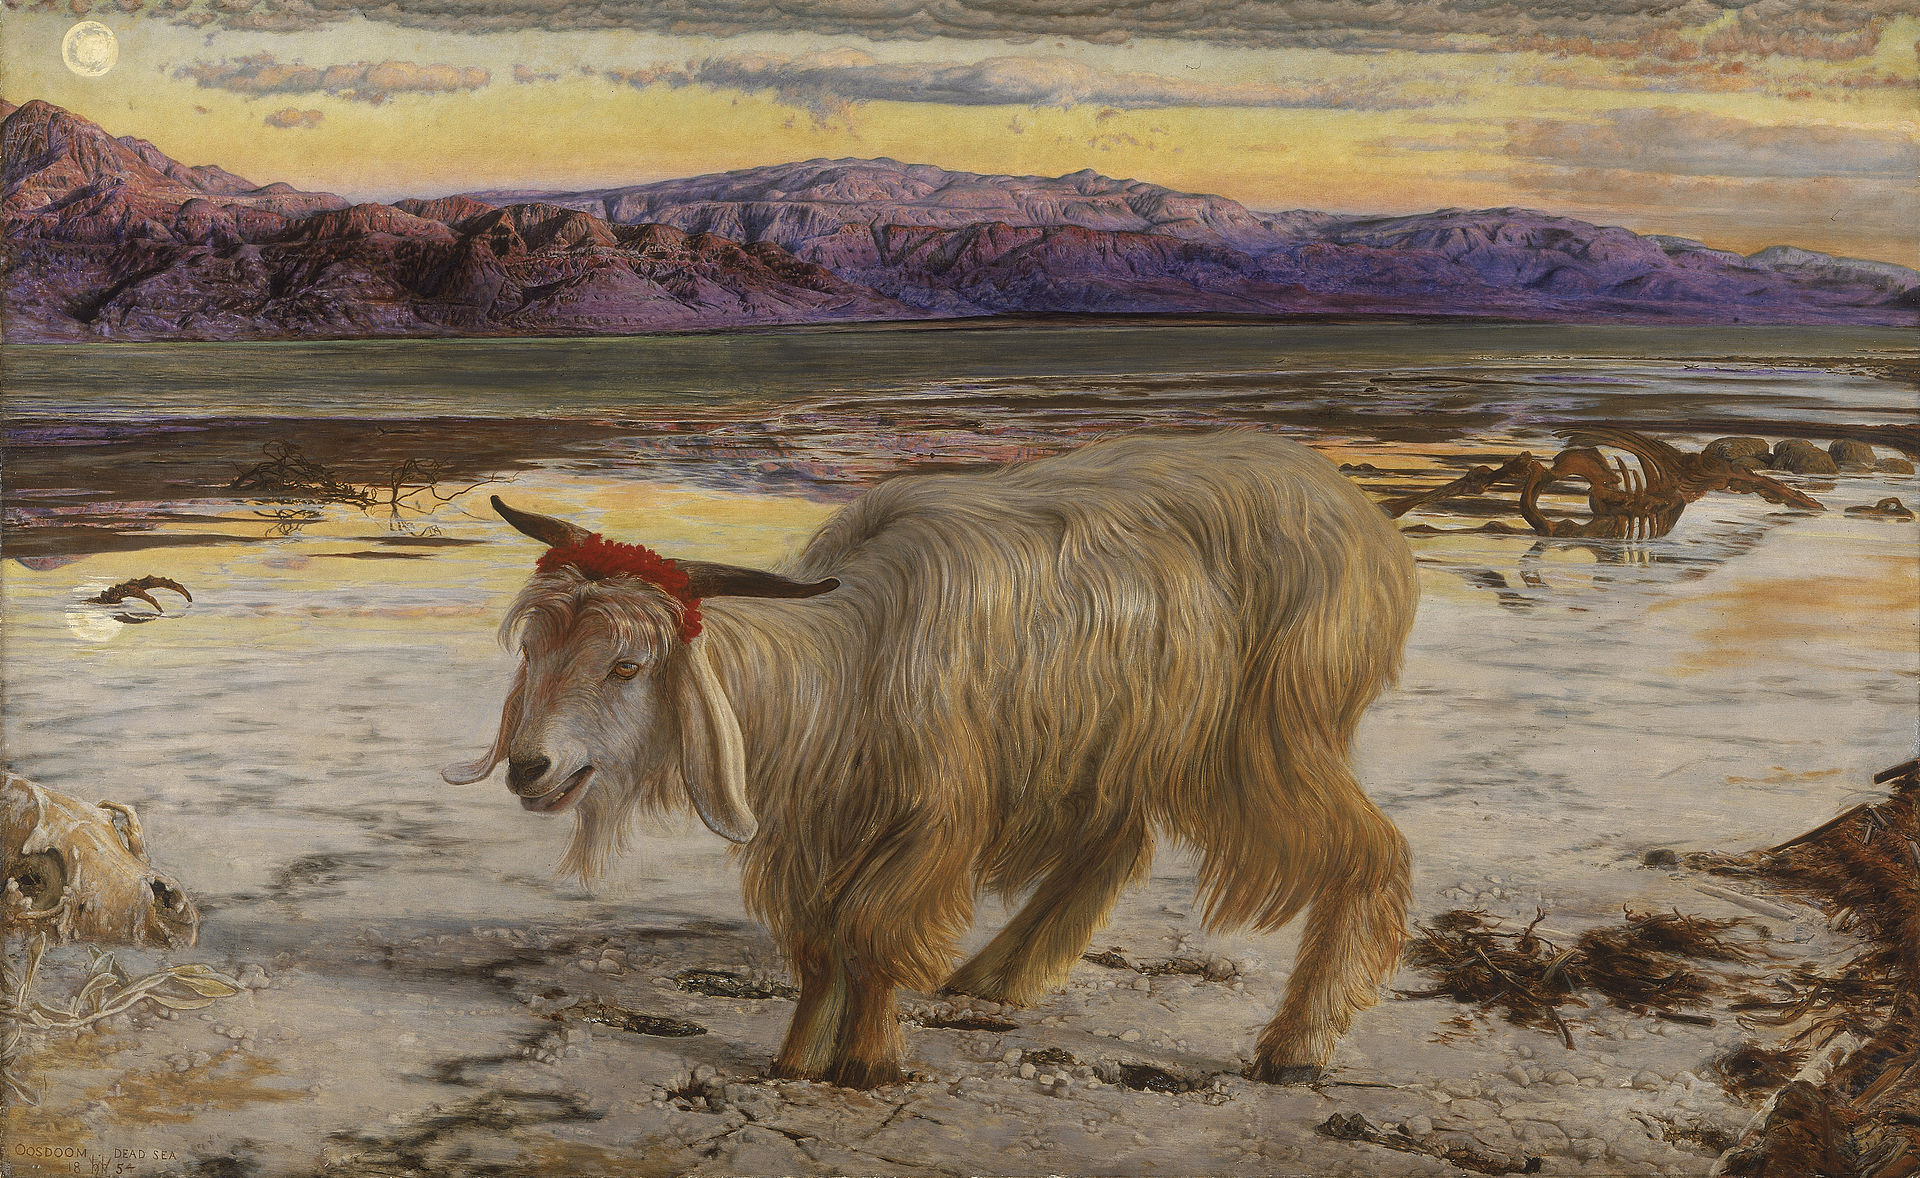 The Scapegoat by William Holman Hunt, 1854.